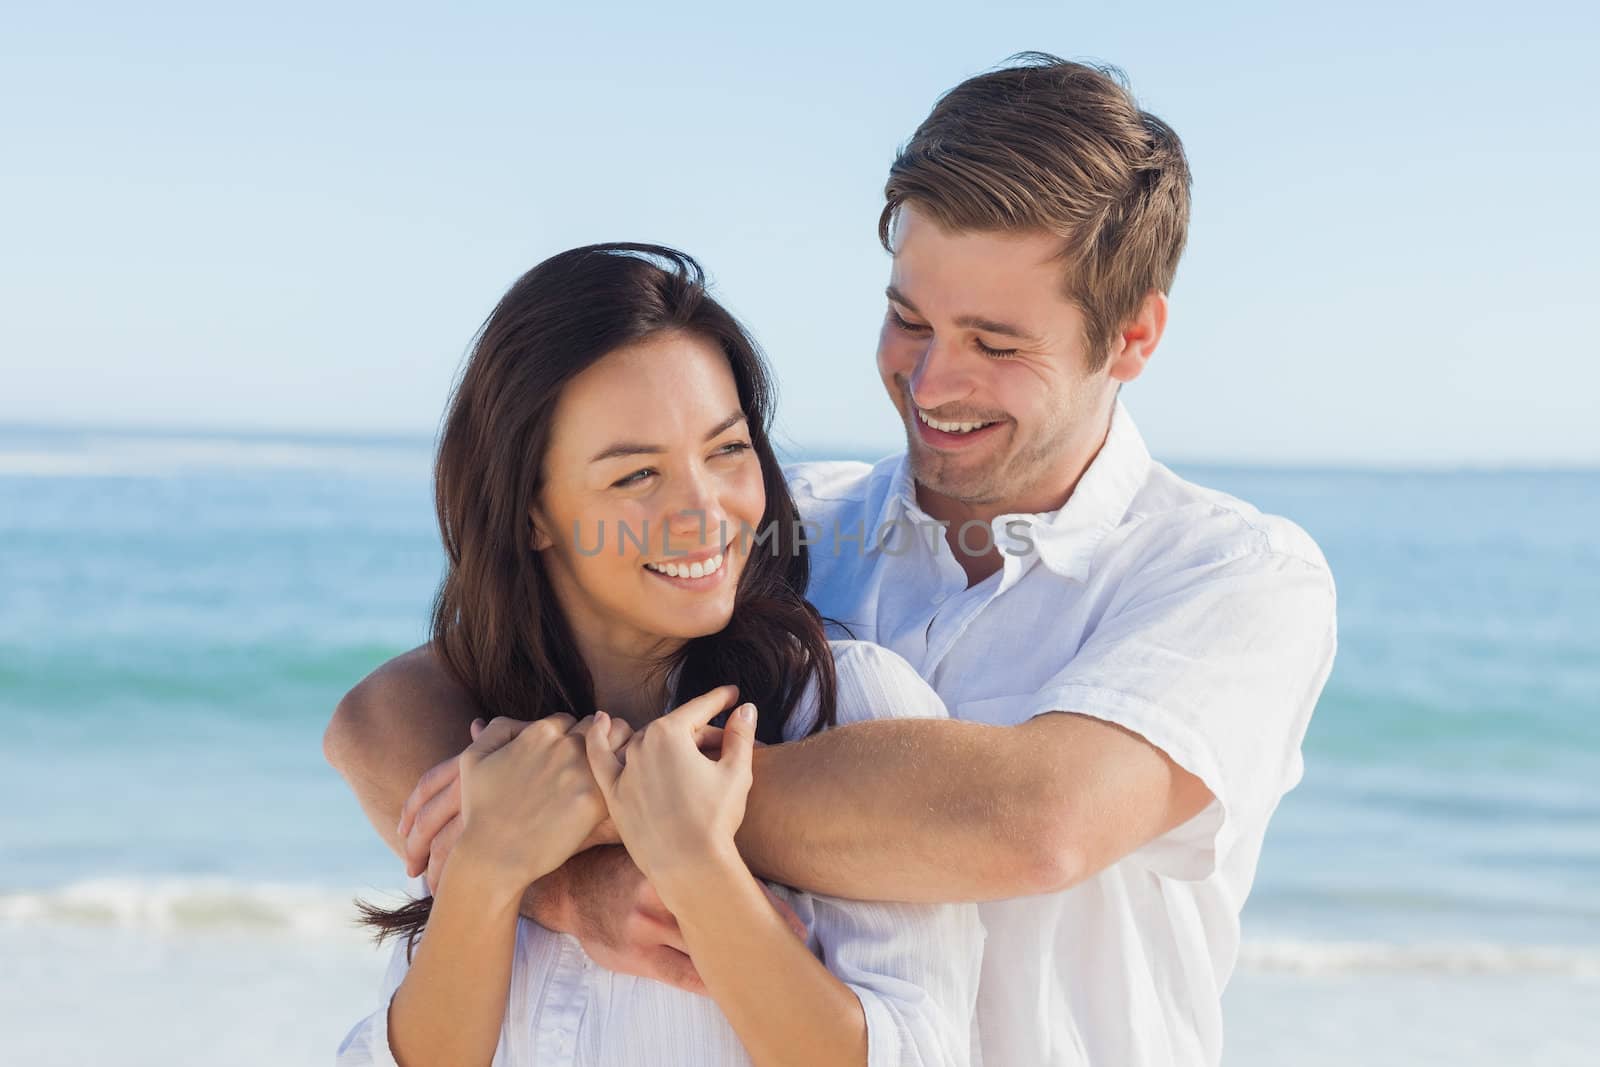 Cheerful couple relaxing and embracing on the beach during summer